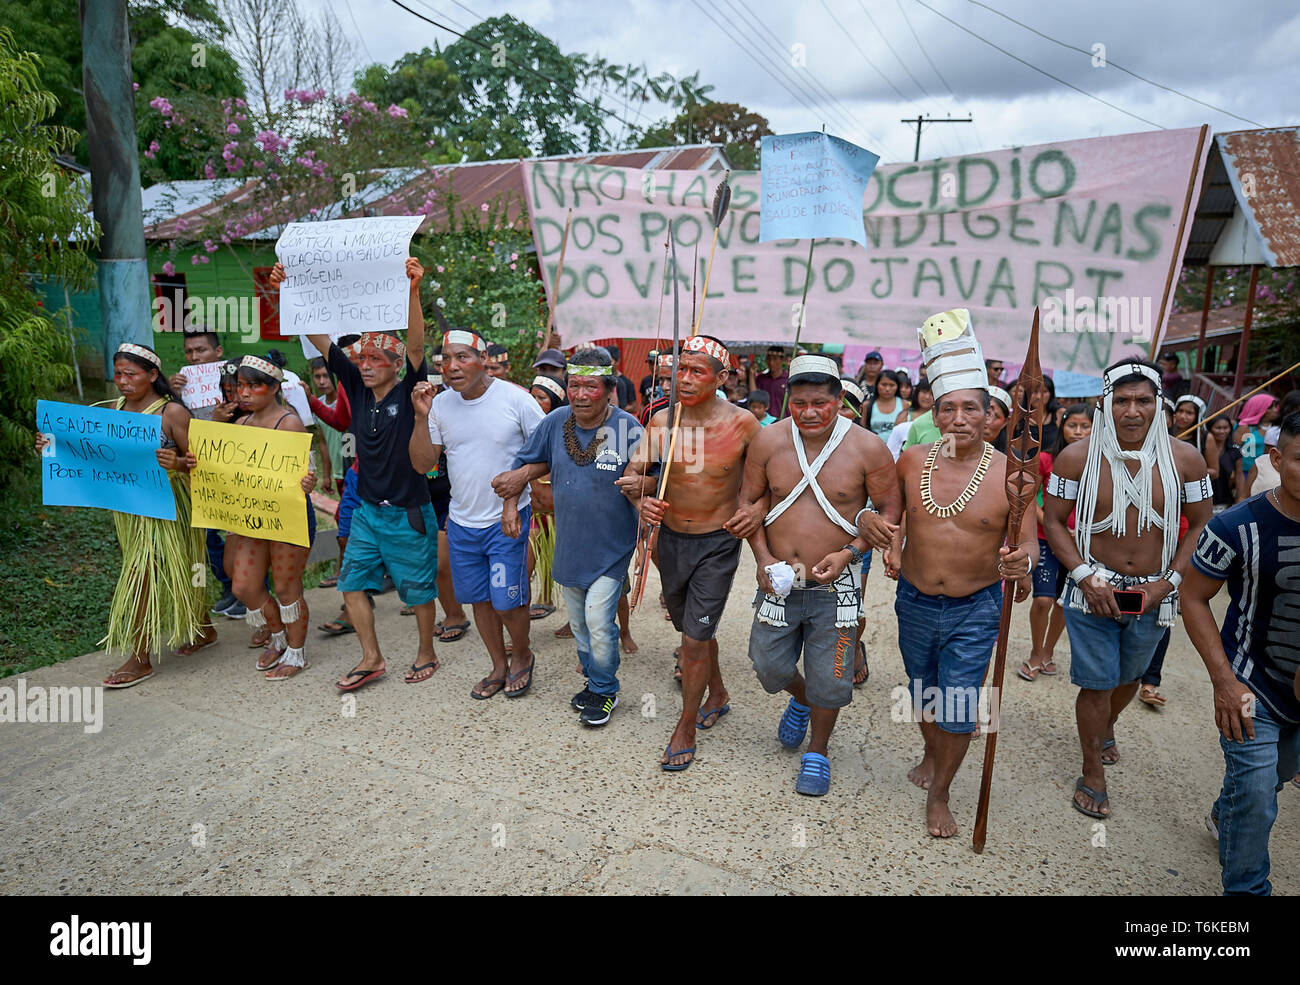 Indigenous people march through Atalaia do Norte in Brazil's Amazon region, protesting a central government plan to municipalize health care. Stock Photo